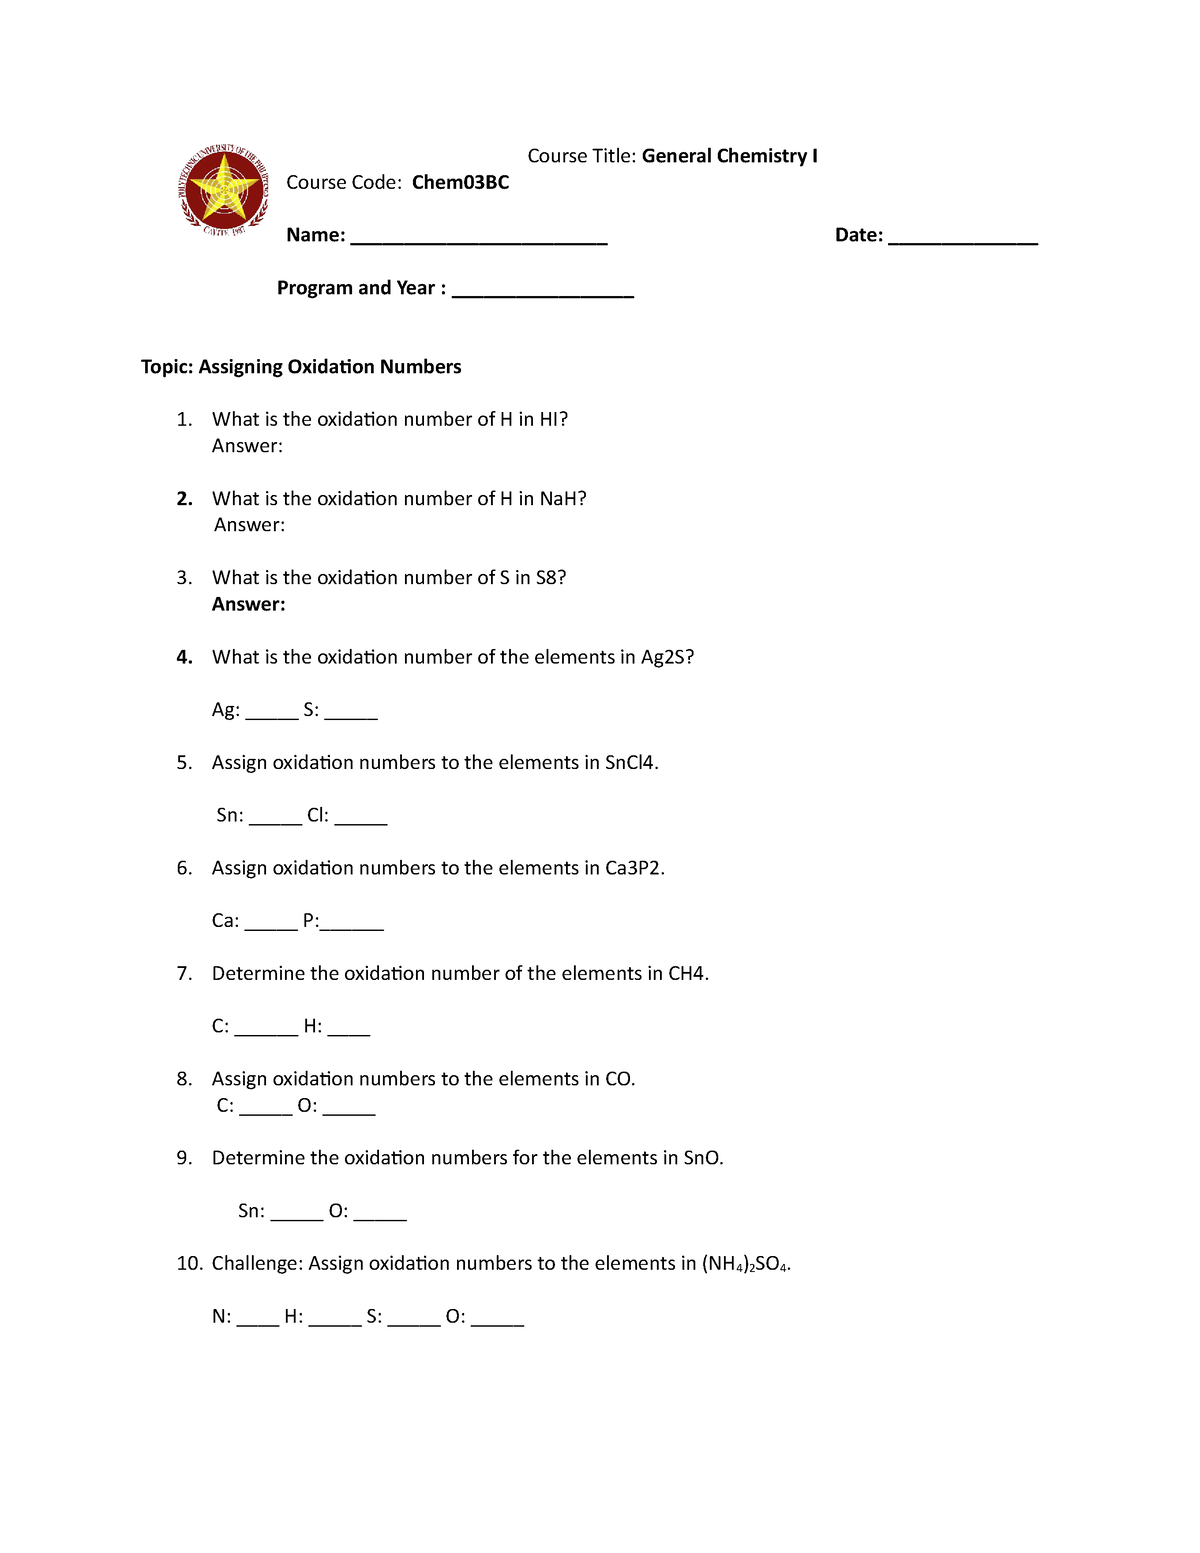 Assigning Oxidation Number Worksheet Course Code Chem03BC Course Title General Chemistry I